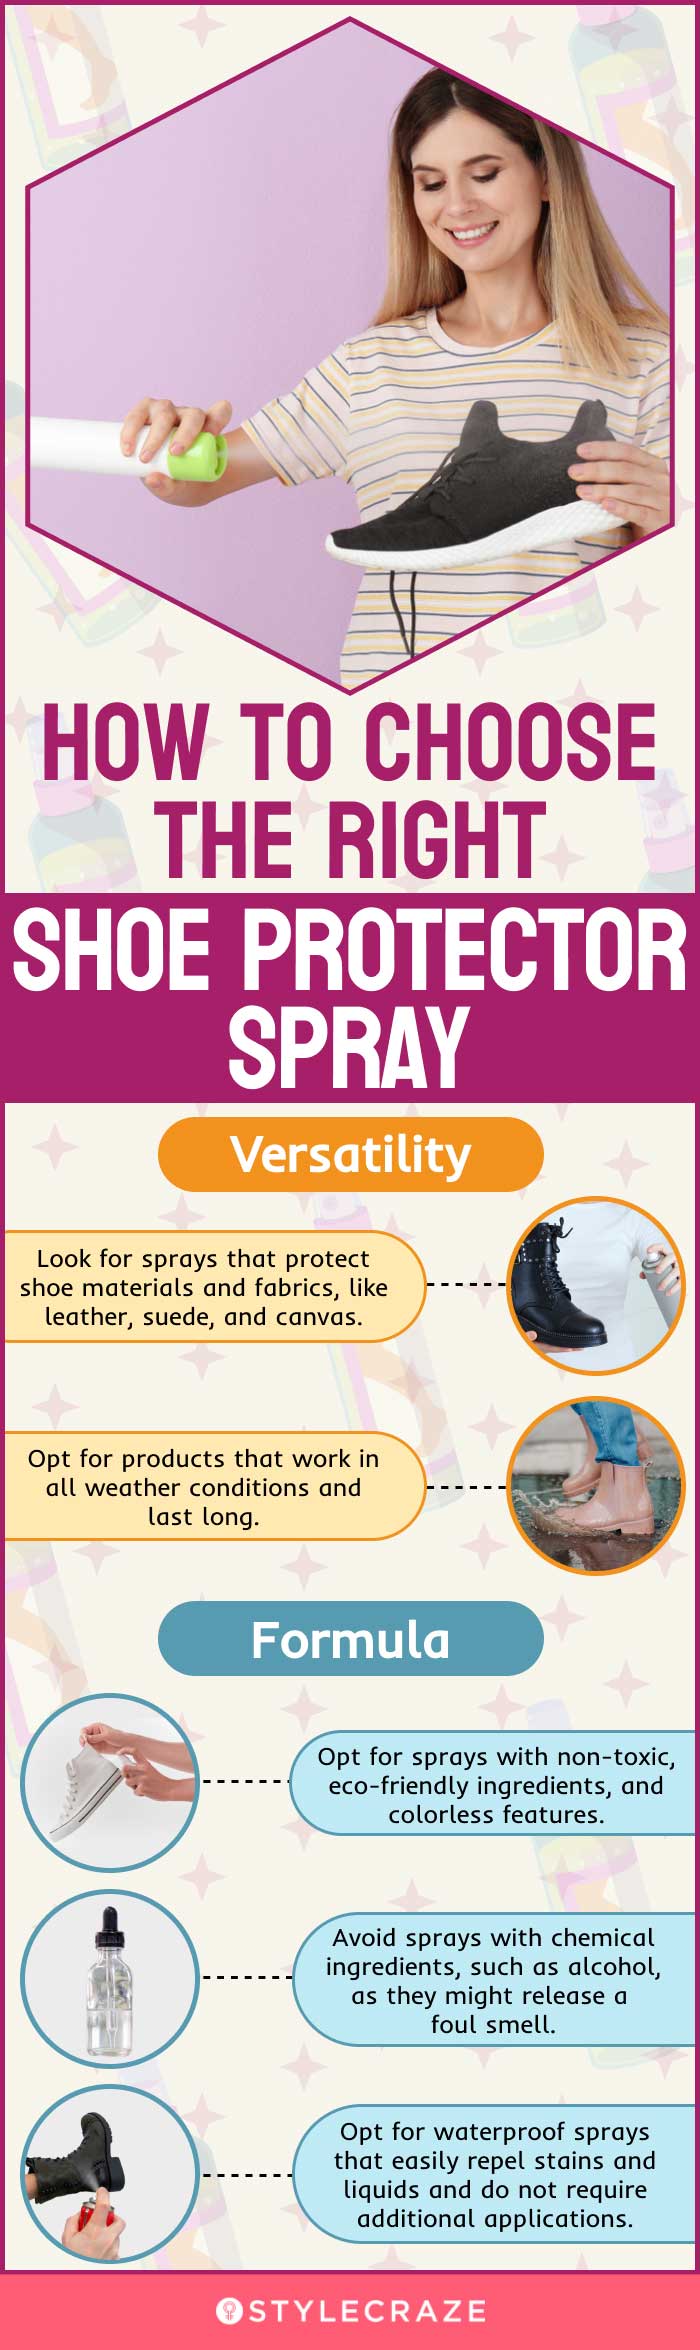 Sneaky Spray shoe protector trainer suede waterproof 1 can 200ML FAST  SHIPPING | eBay